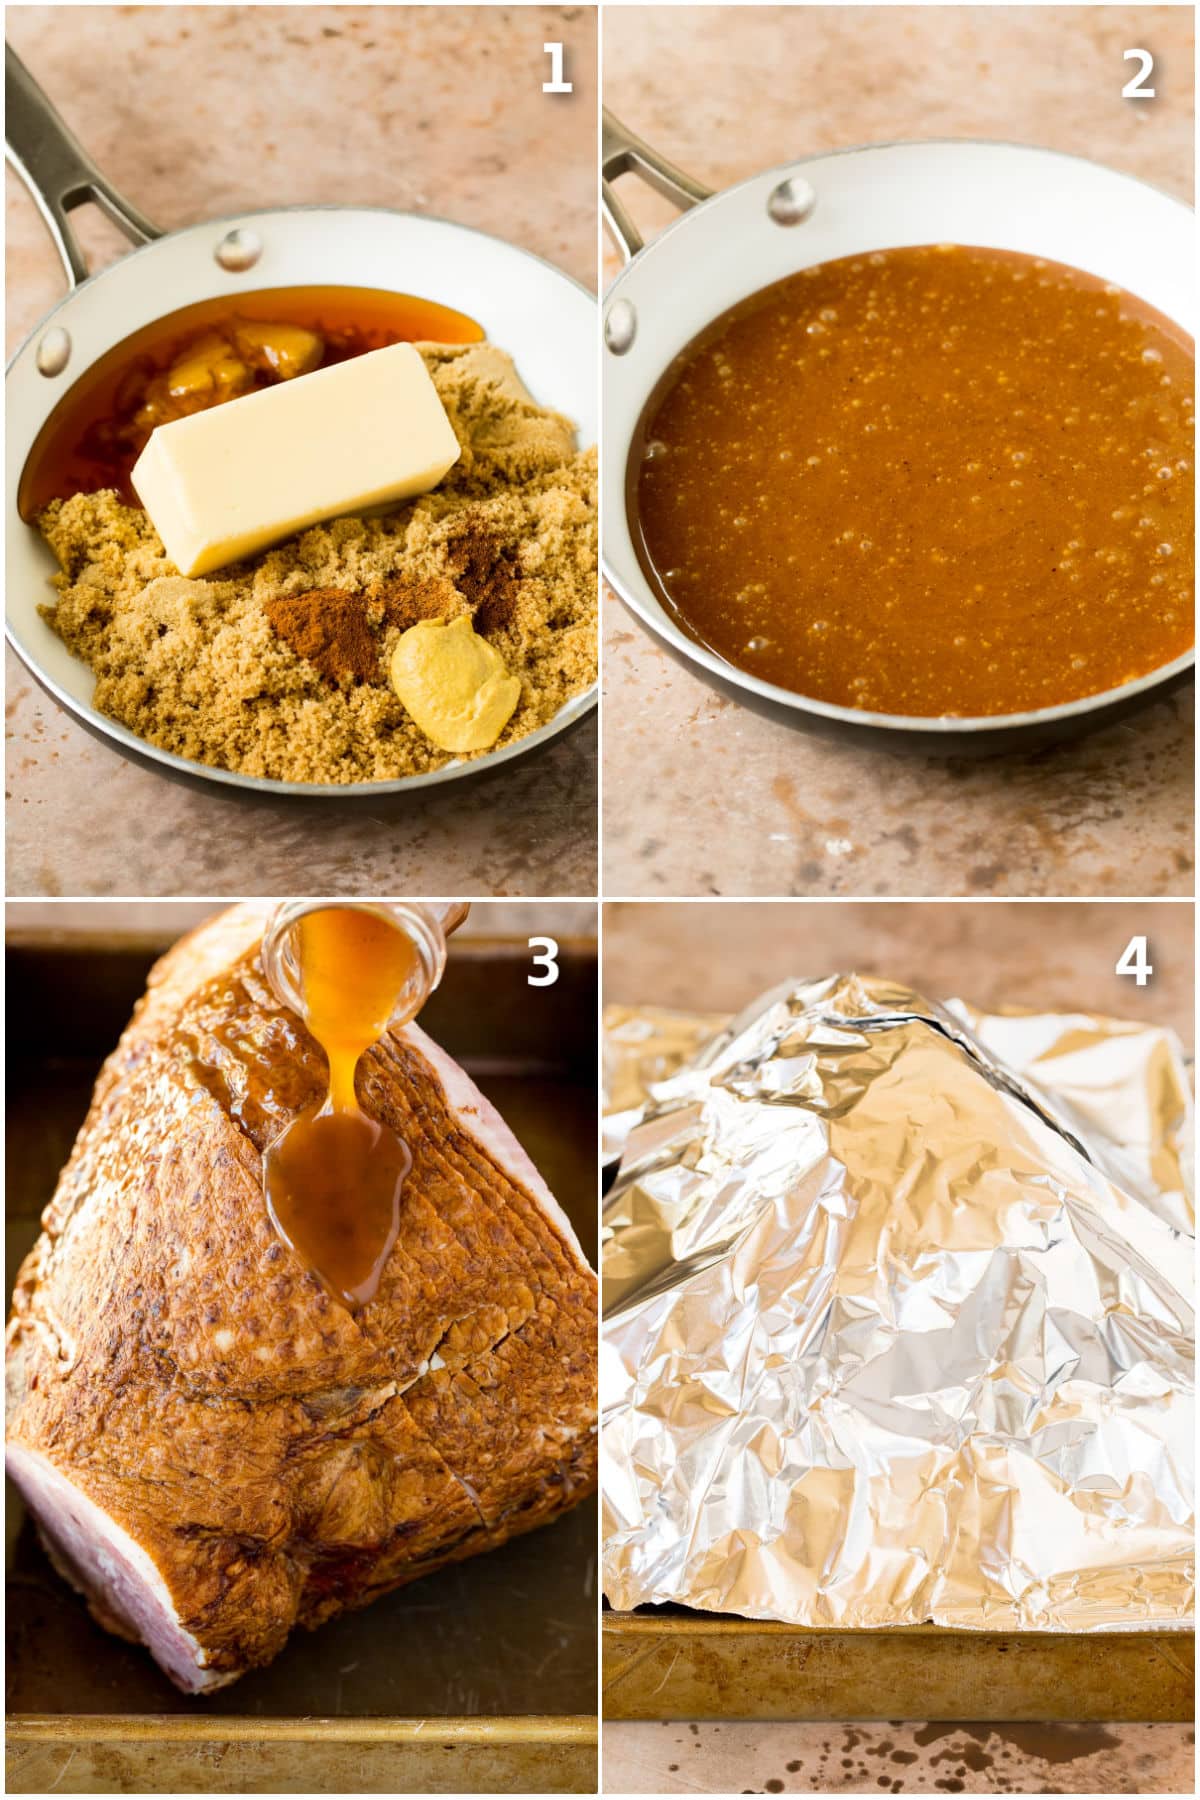 Step by step process shots showing how to make honey glazed ham.